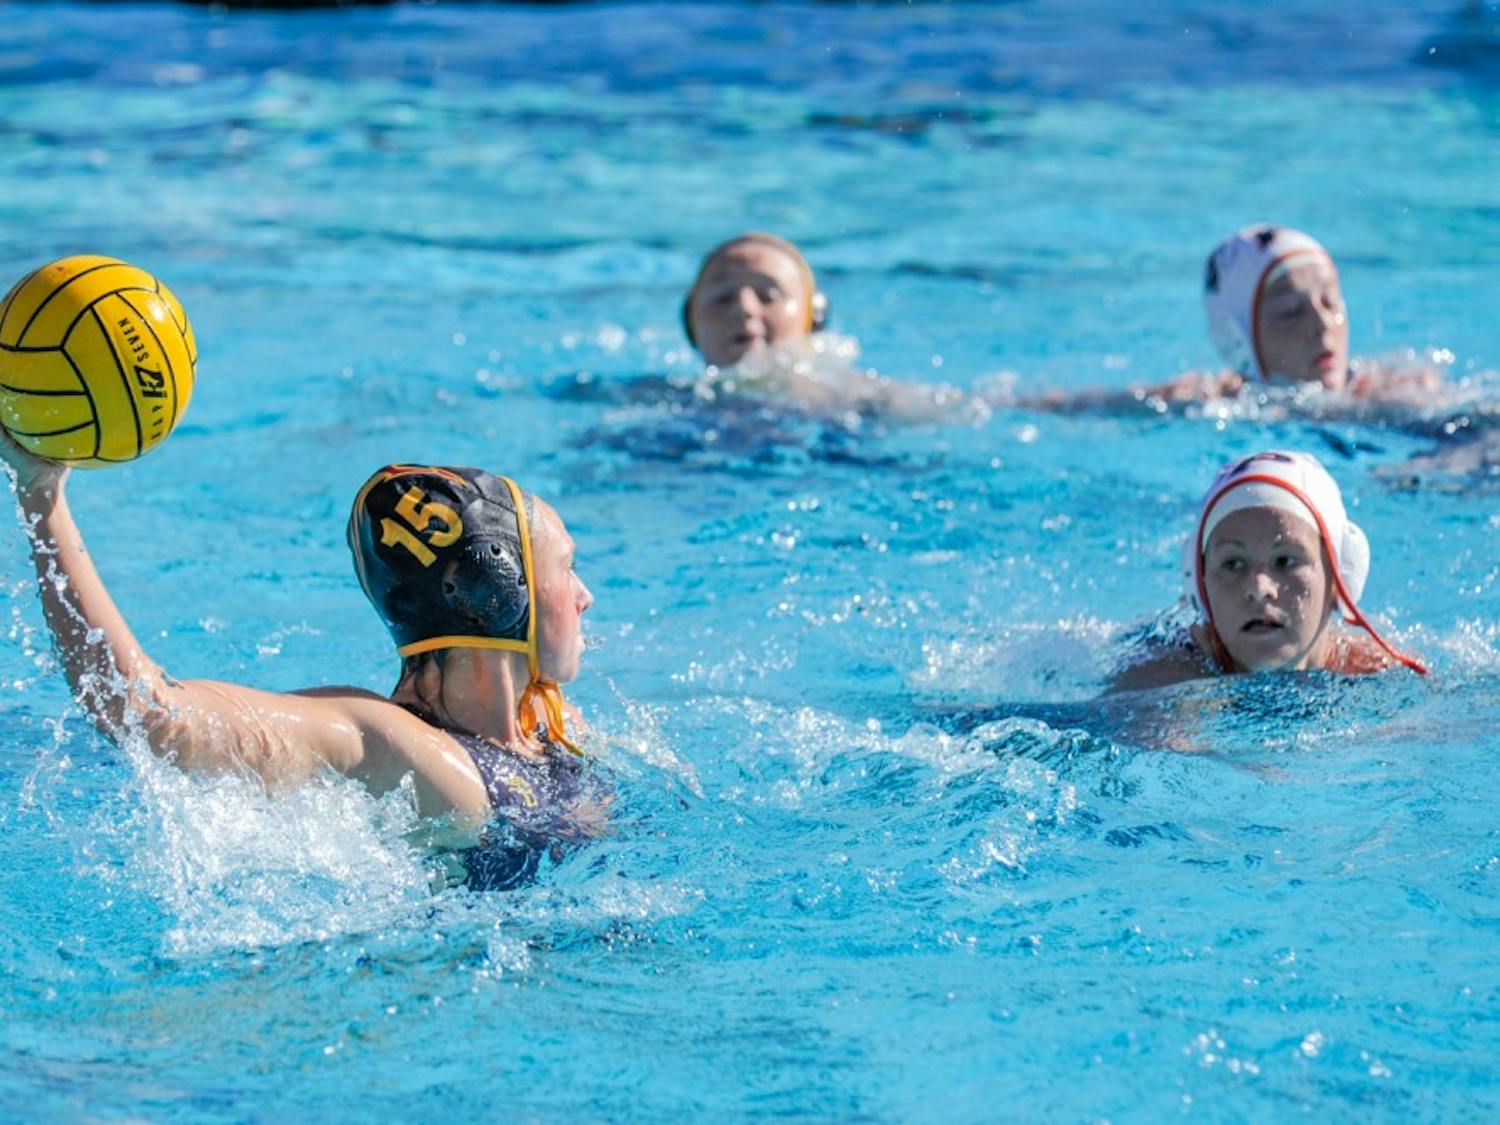 Sophomore Taylor Bertrand looks to pass&nbsp;against the University of Pacific on Sunday, March 20, 2016 at the Mona Plummer Aquatic Complex in Tempe, AZ. ASU water polo won 5-3.